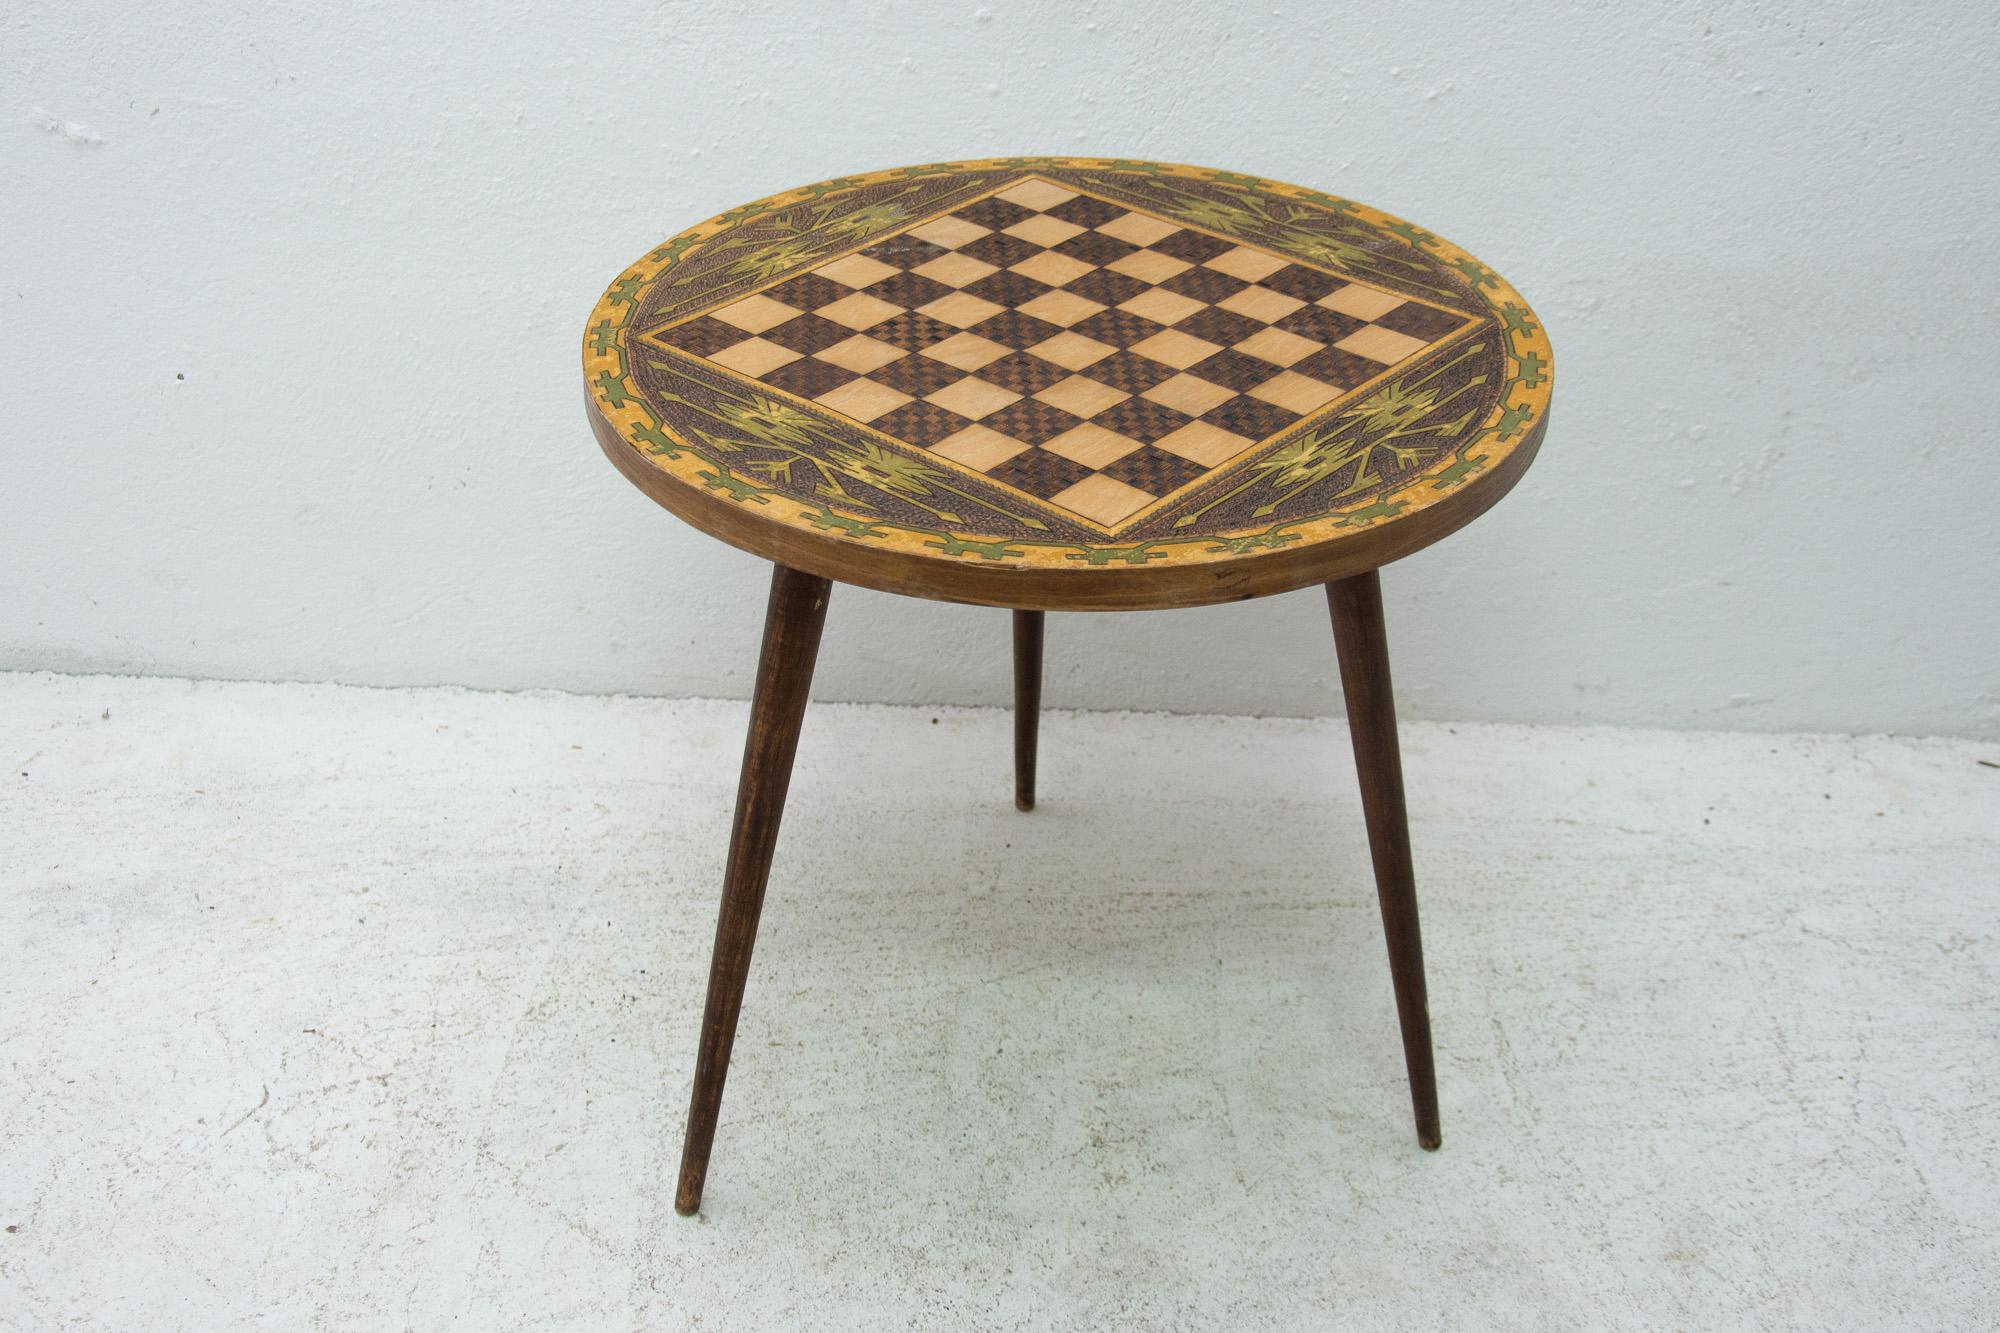 20th Century Vintage Round Side Table with Chess Pattern, 1970s, Albania